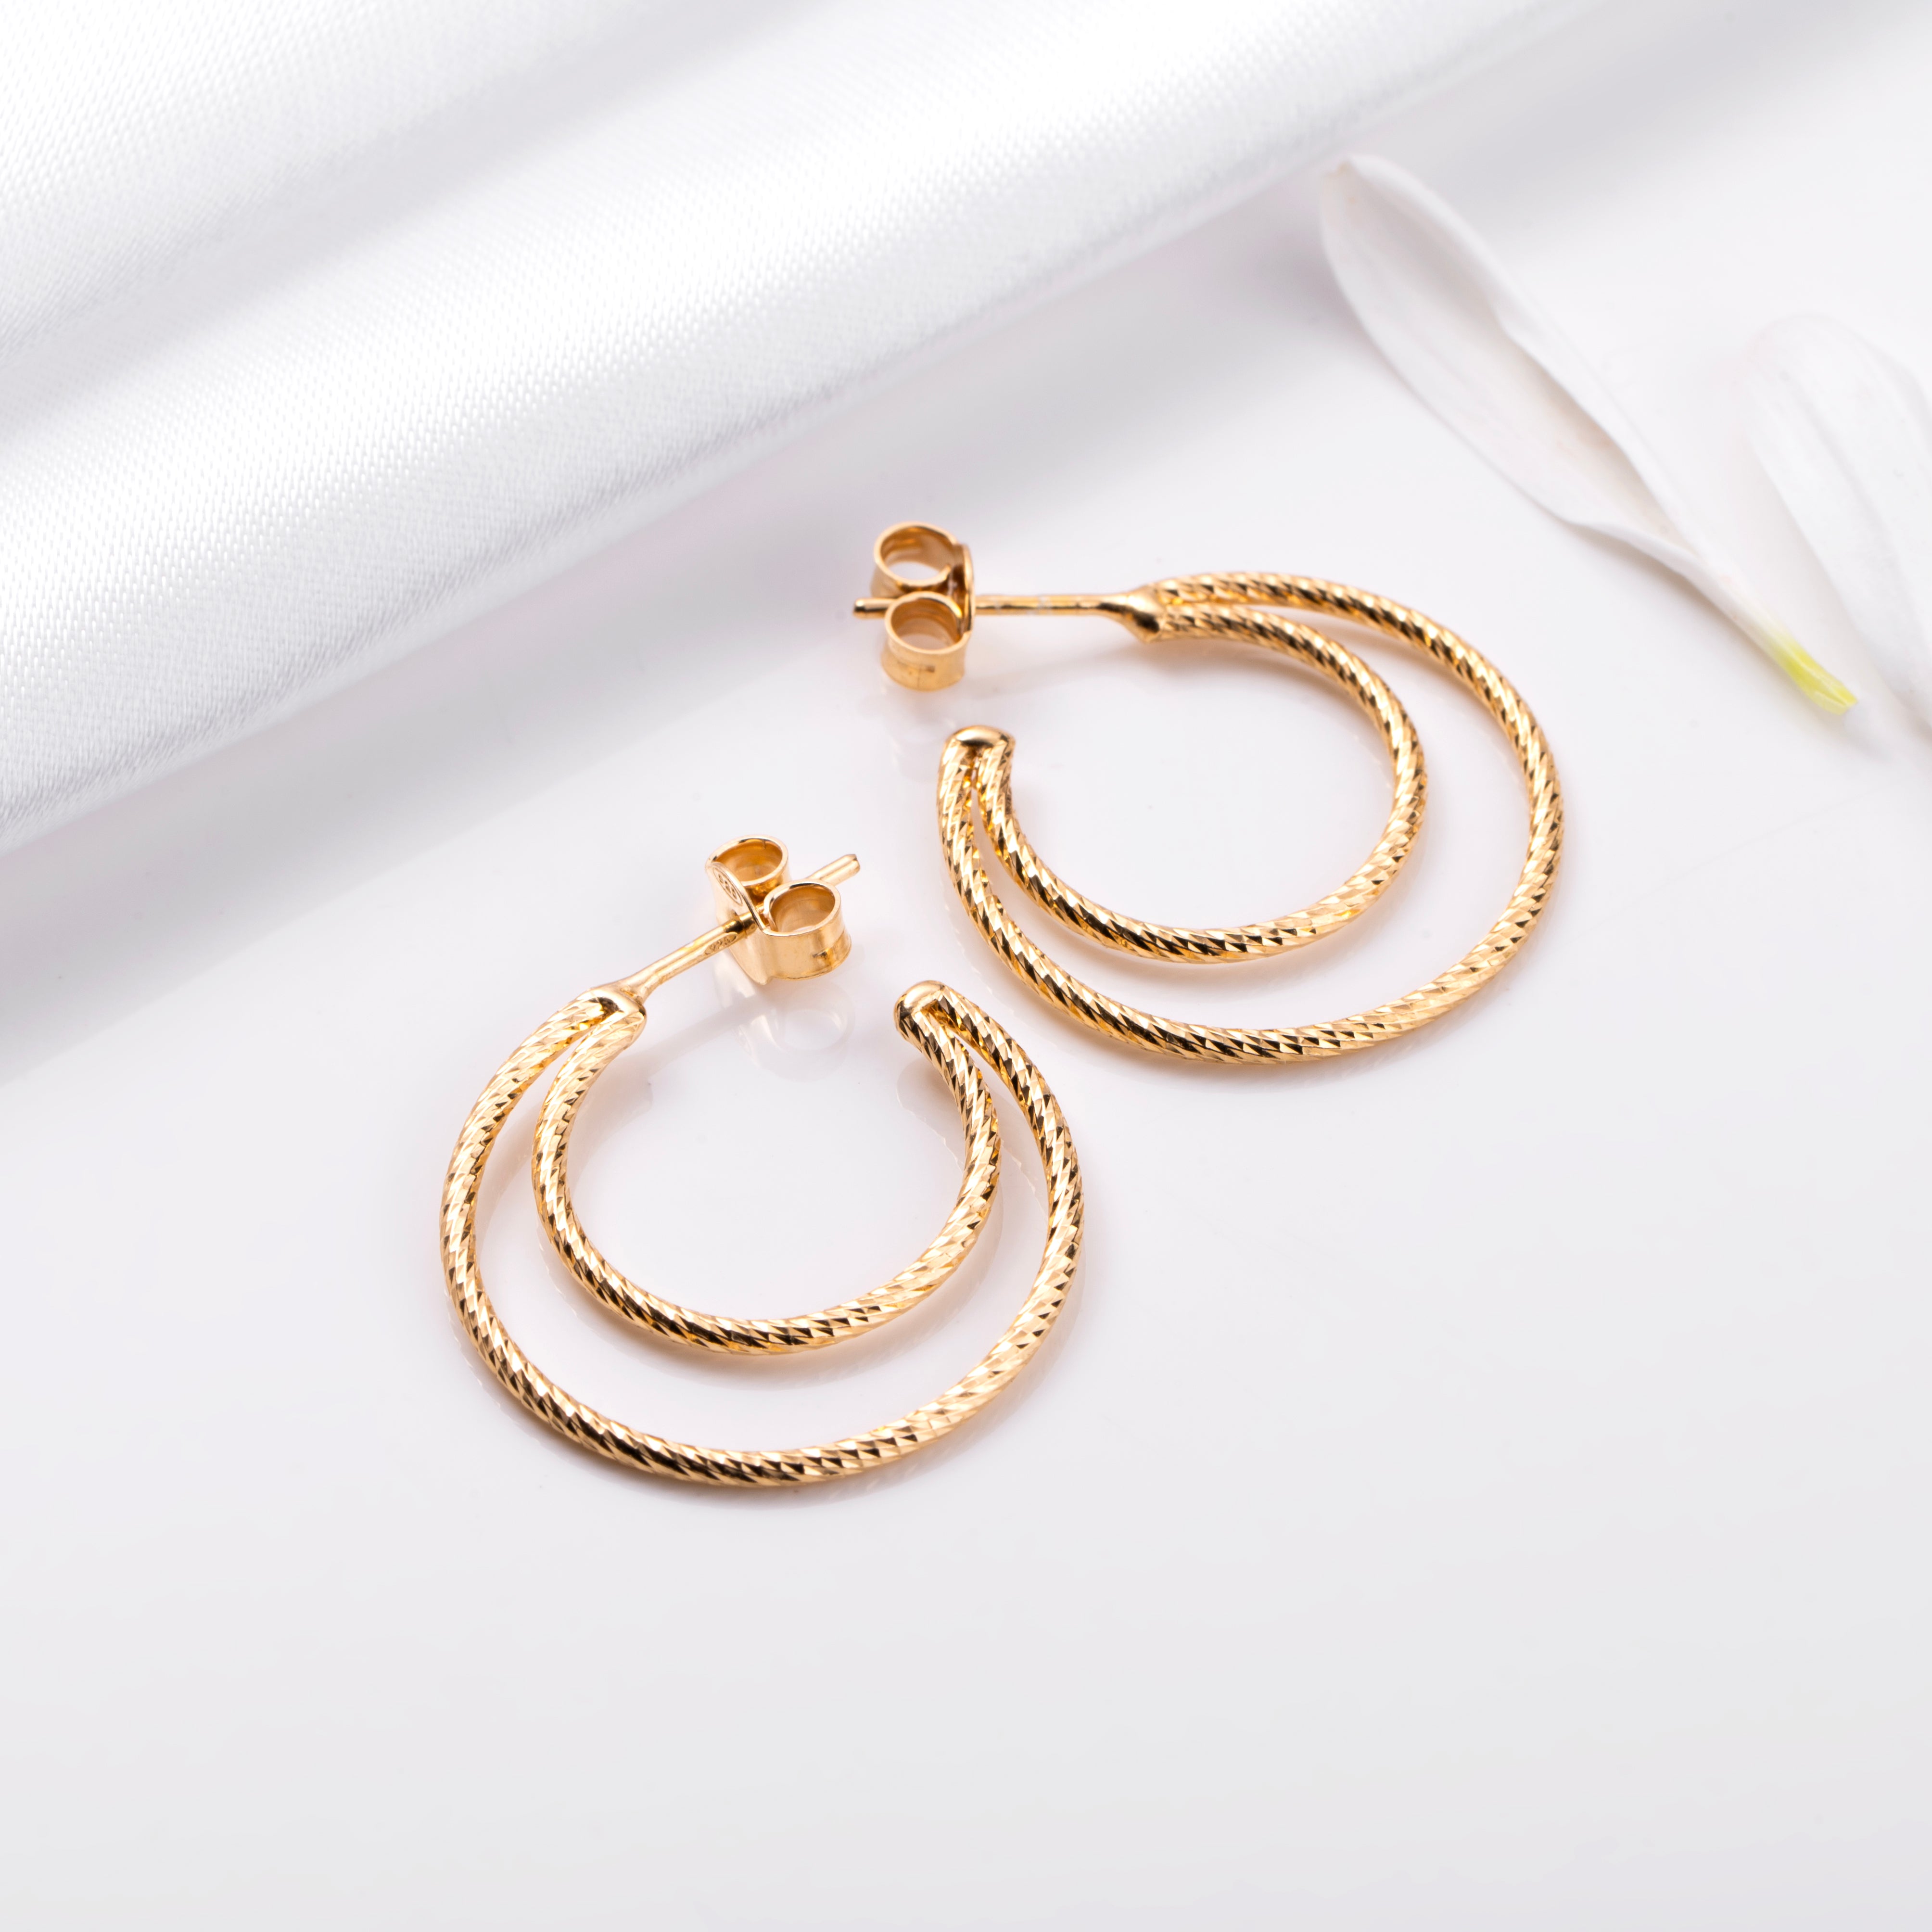 Modern Glamour Gold-Plated 925 Sterling Silver Hoop Earring